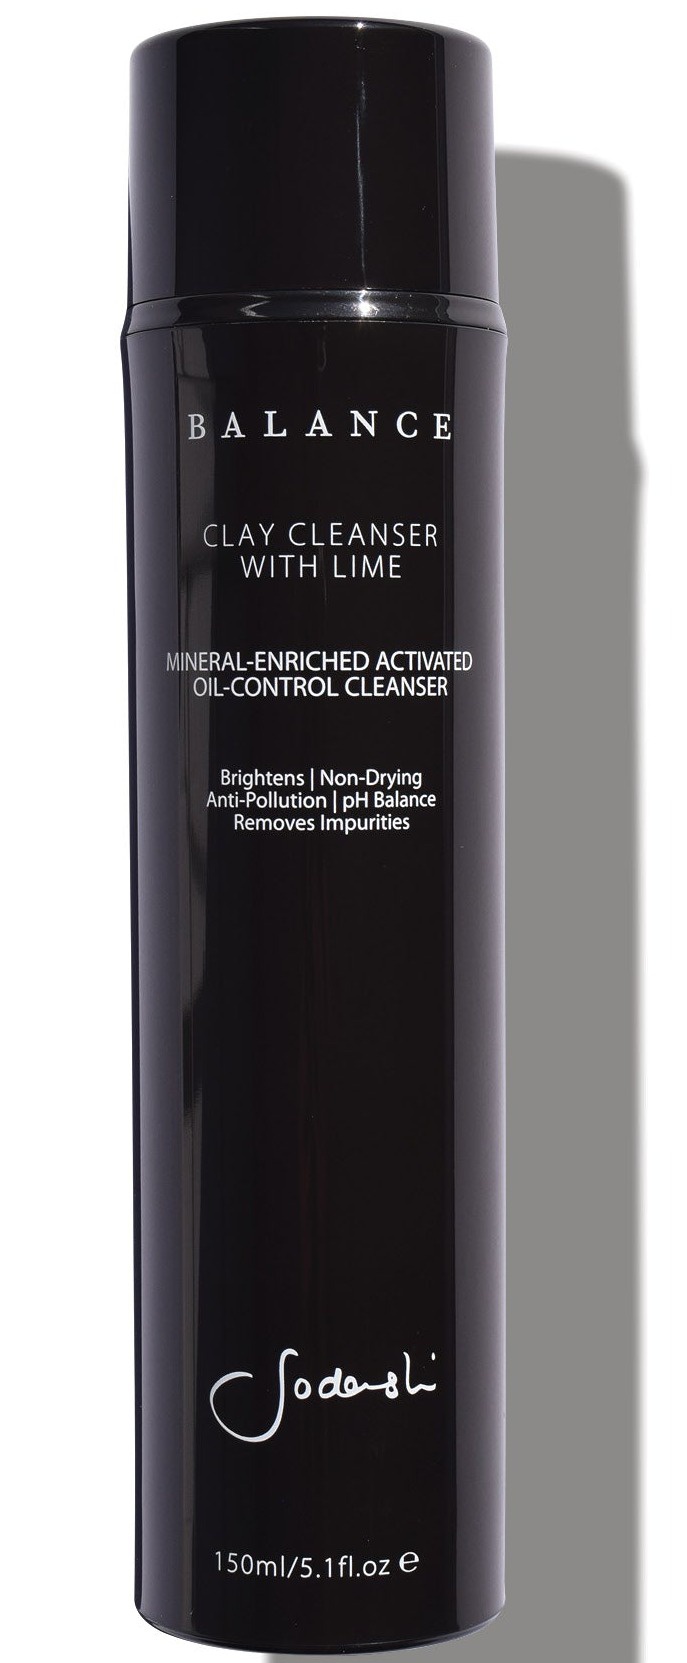 Sodashi Clay Cleanser With Lime